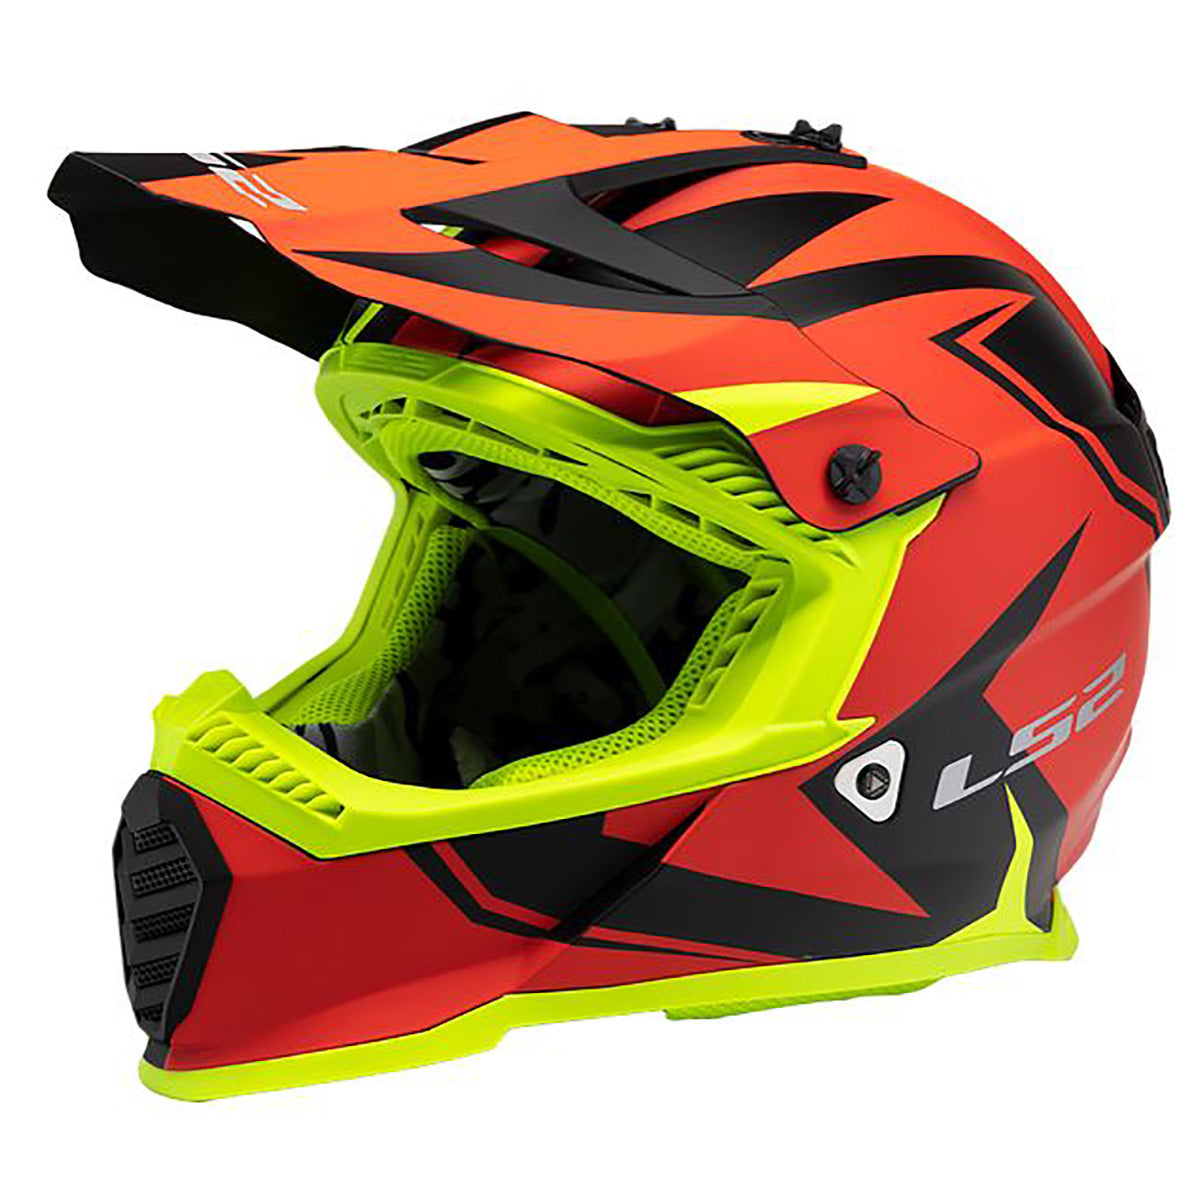 LS2 Gate Youth Launch Full Face MX Motorcycle Helmet White/Red/Blk